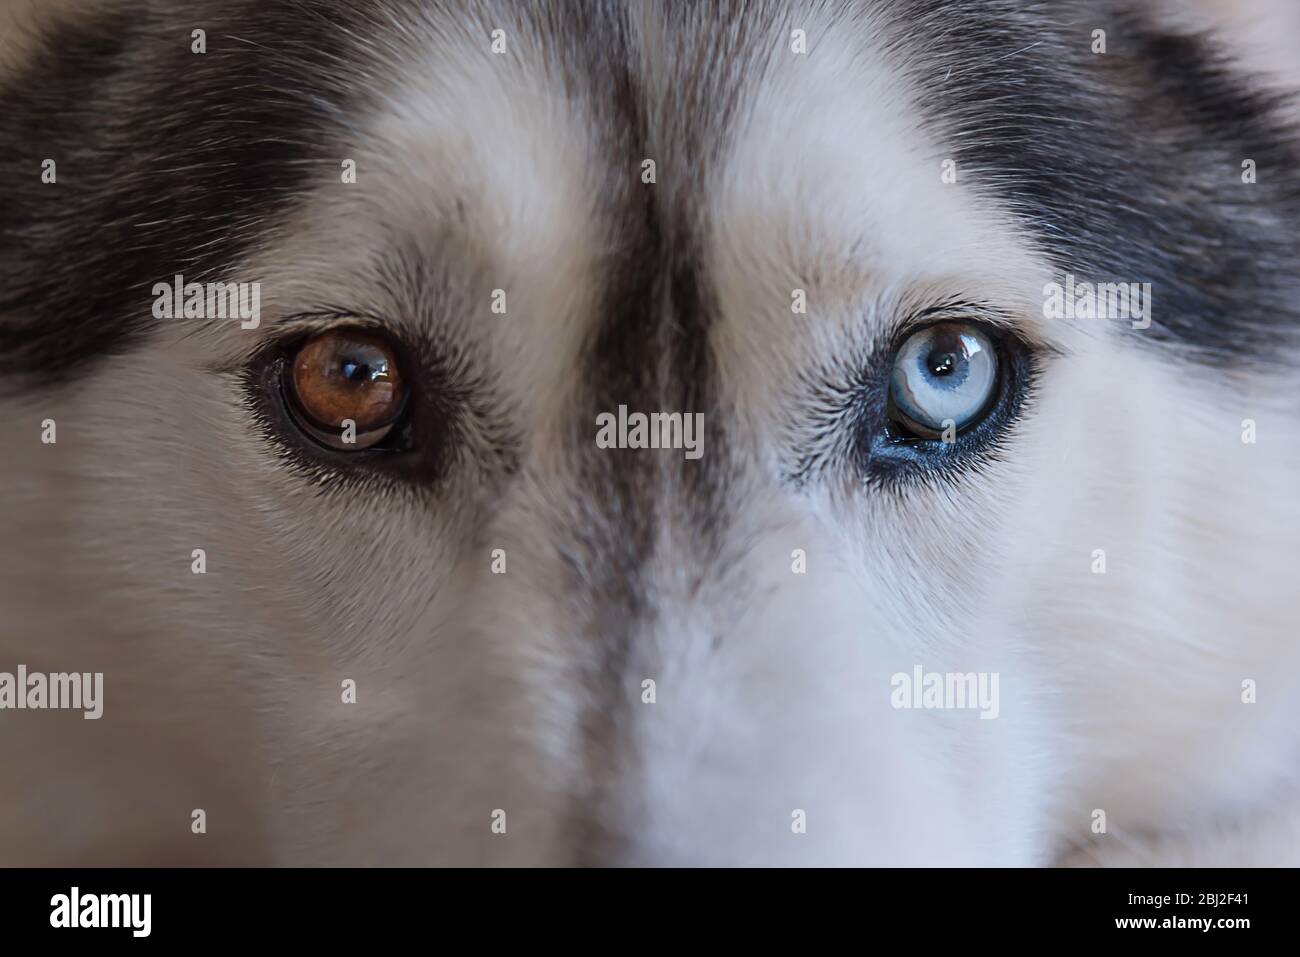 Husky looks directly at lens with piercing eyes. Stock Photo